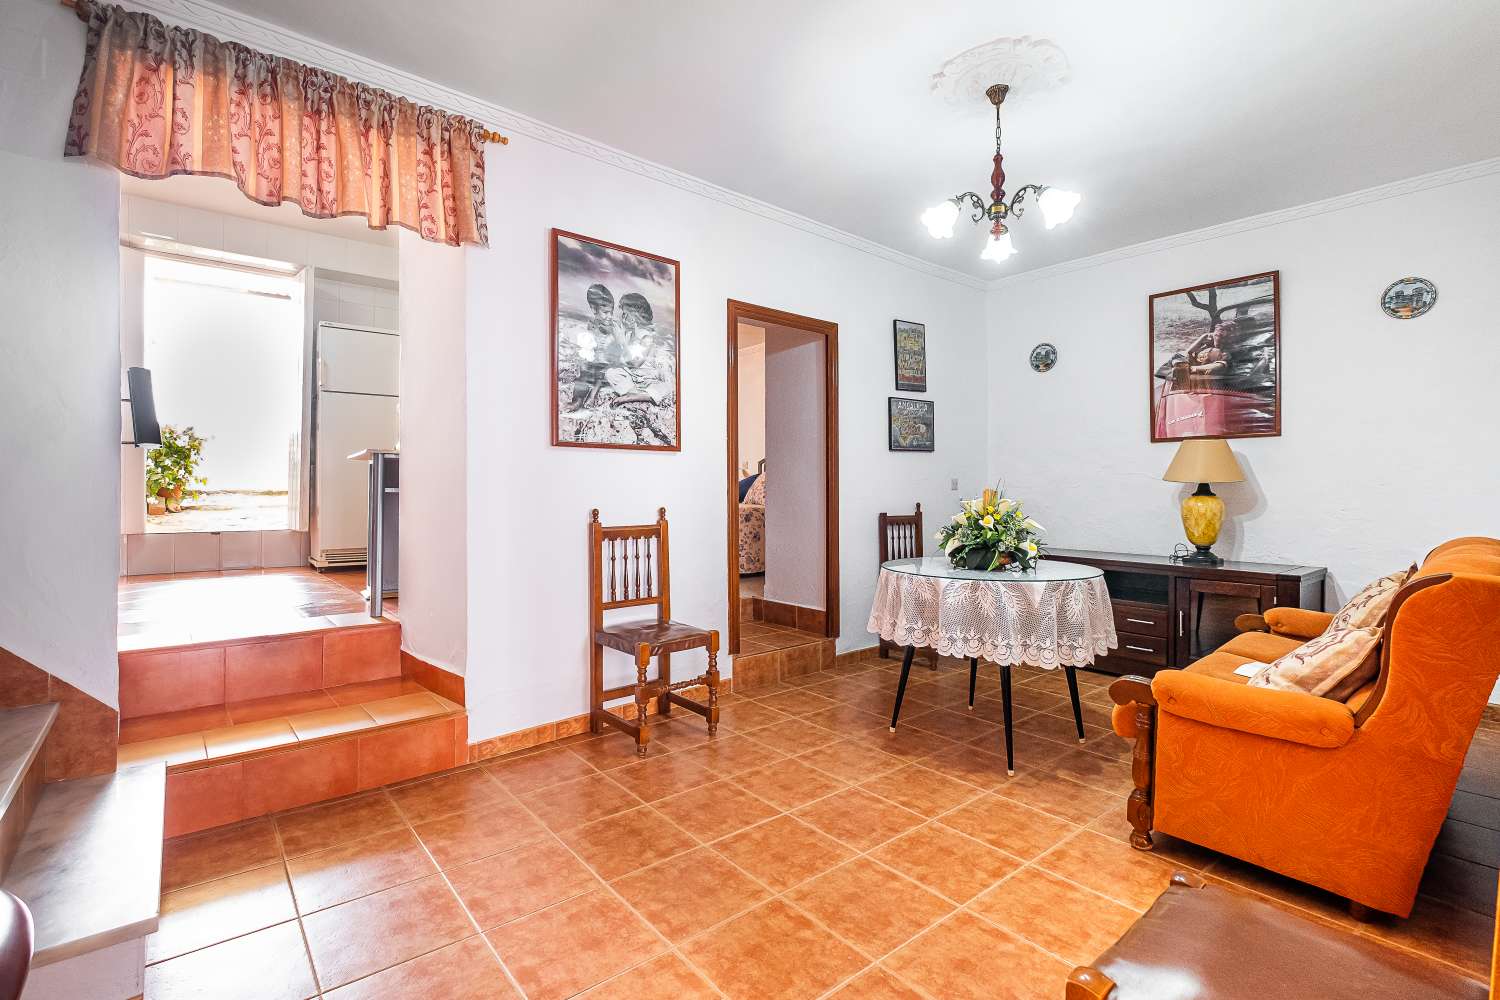 Traditional Andalusian town house in Riogordo